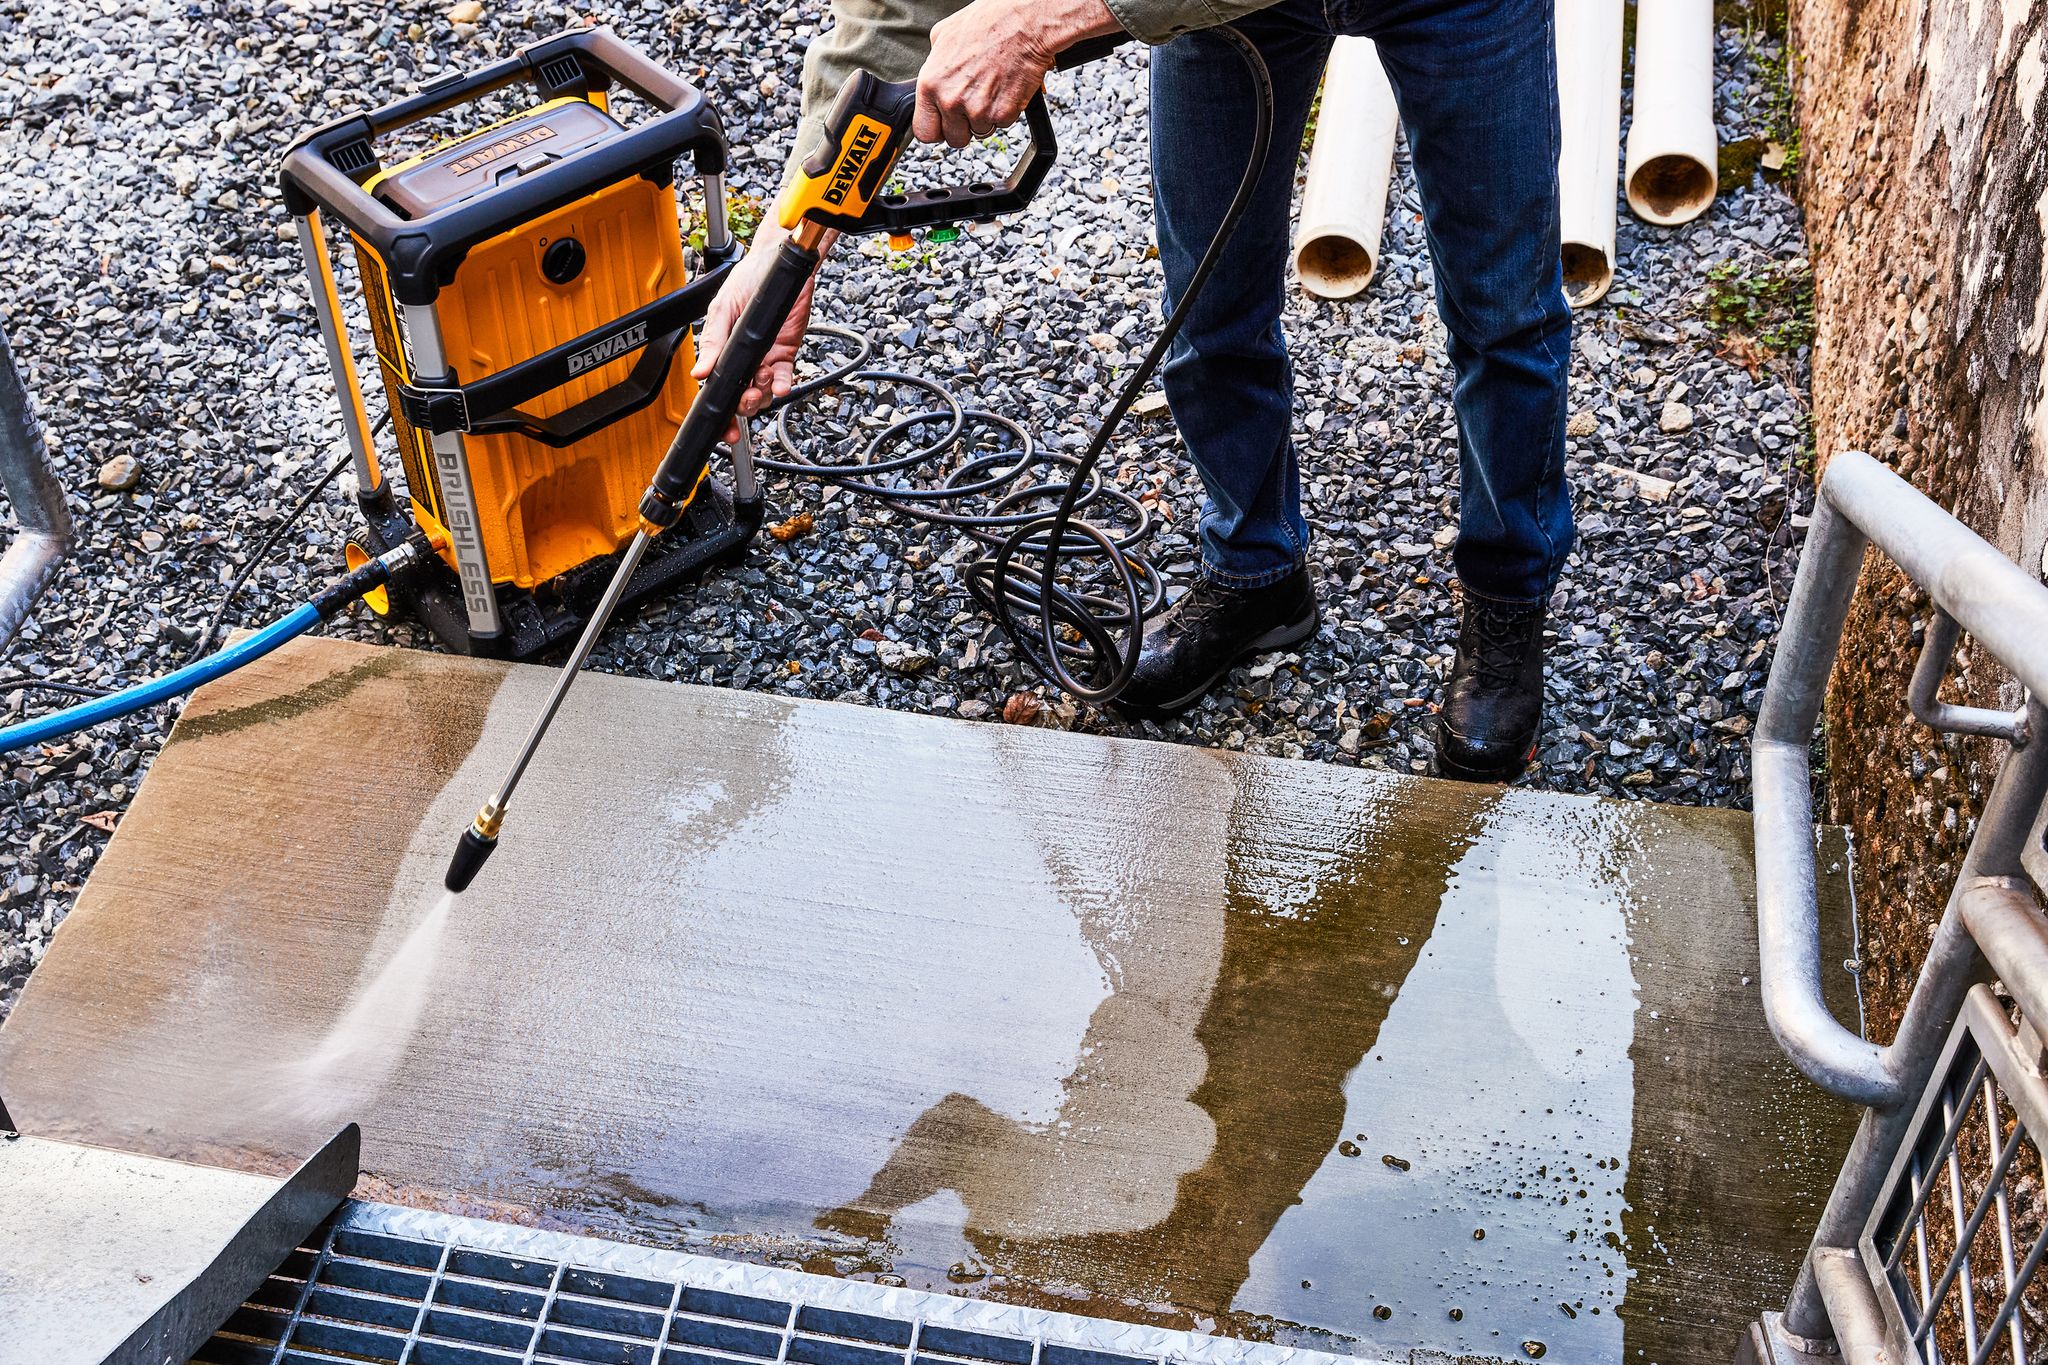 When It Comes to Summer Cleaning, Pressure Washers Are a Blast